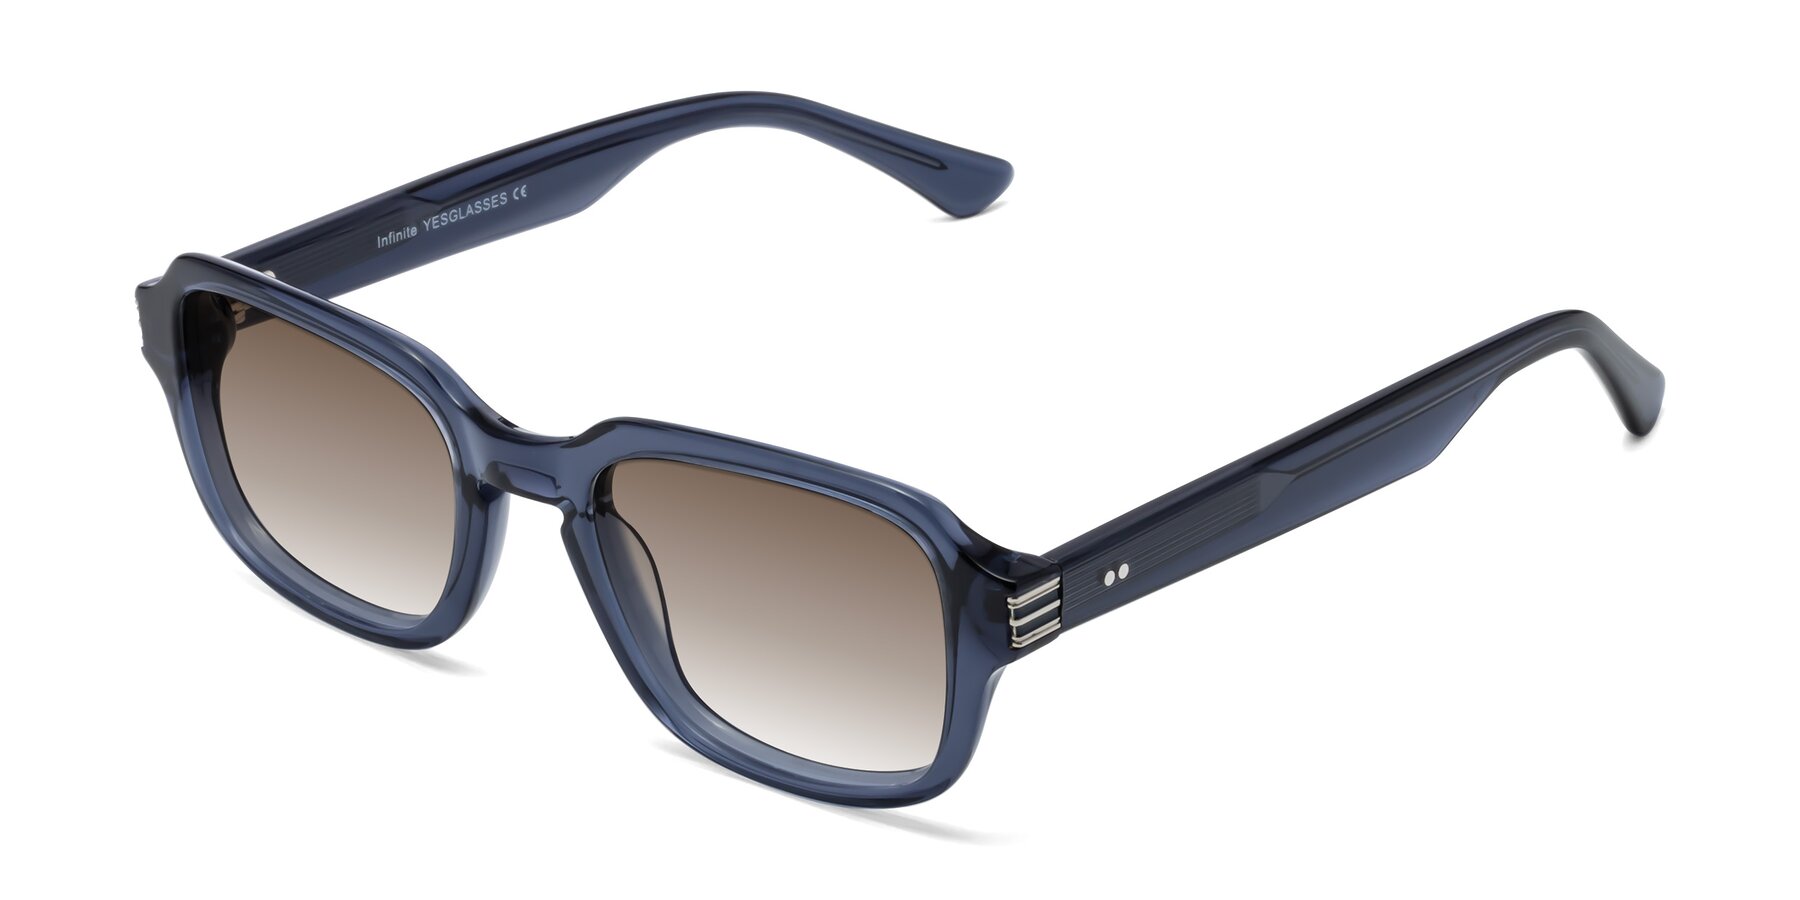 Angle of Infinite in Dark Blue with Brown Gradient Lenses